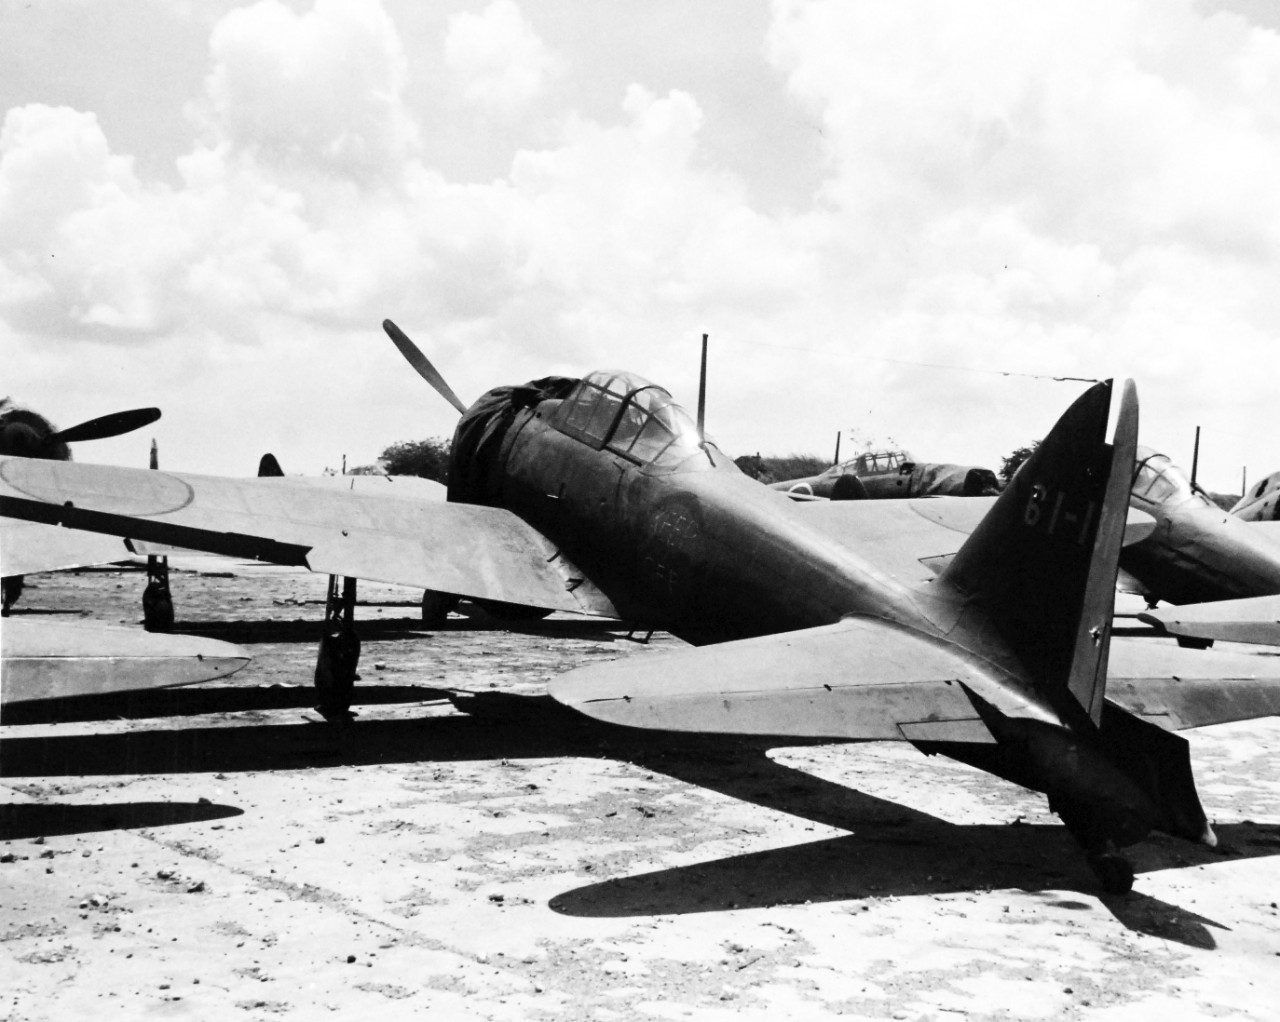 80-G-307726:  Invasion of Saipan, Aslito Airfield, June-July 1944.  Japanese Mitsubishi A6M “Zero” on Saipan at Aslito airfield.  Photograph received March 20, 1945.      Official U.S. Navy Photograph, now in the collections of the U.S. Navy.  (2017/04/11).  